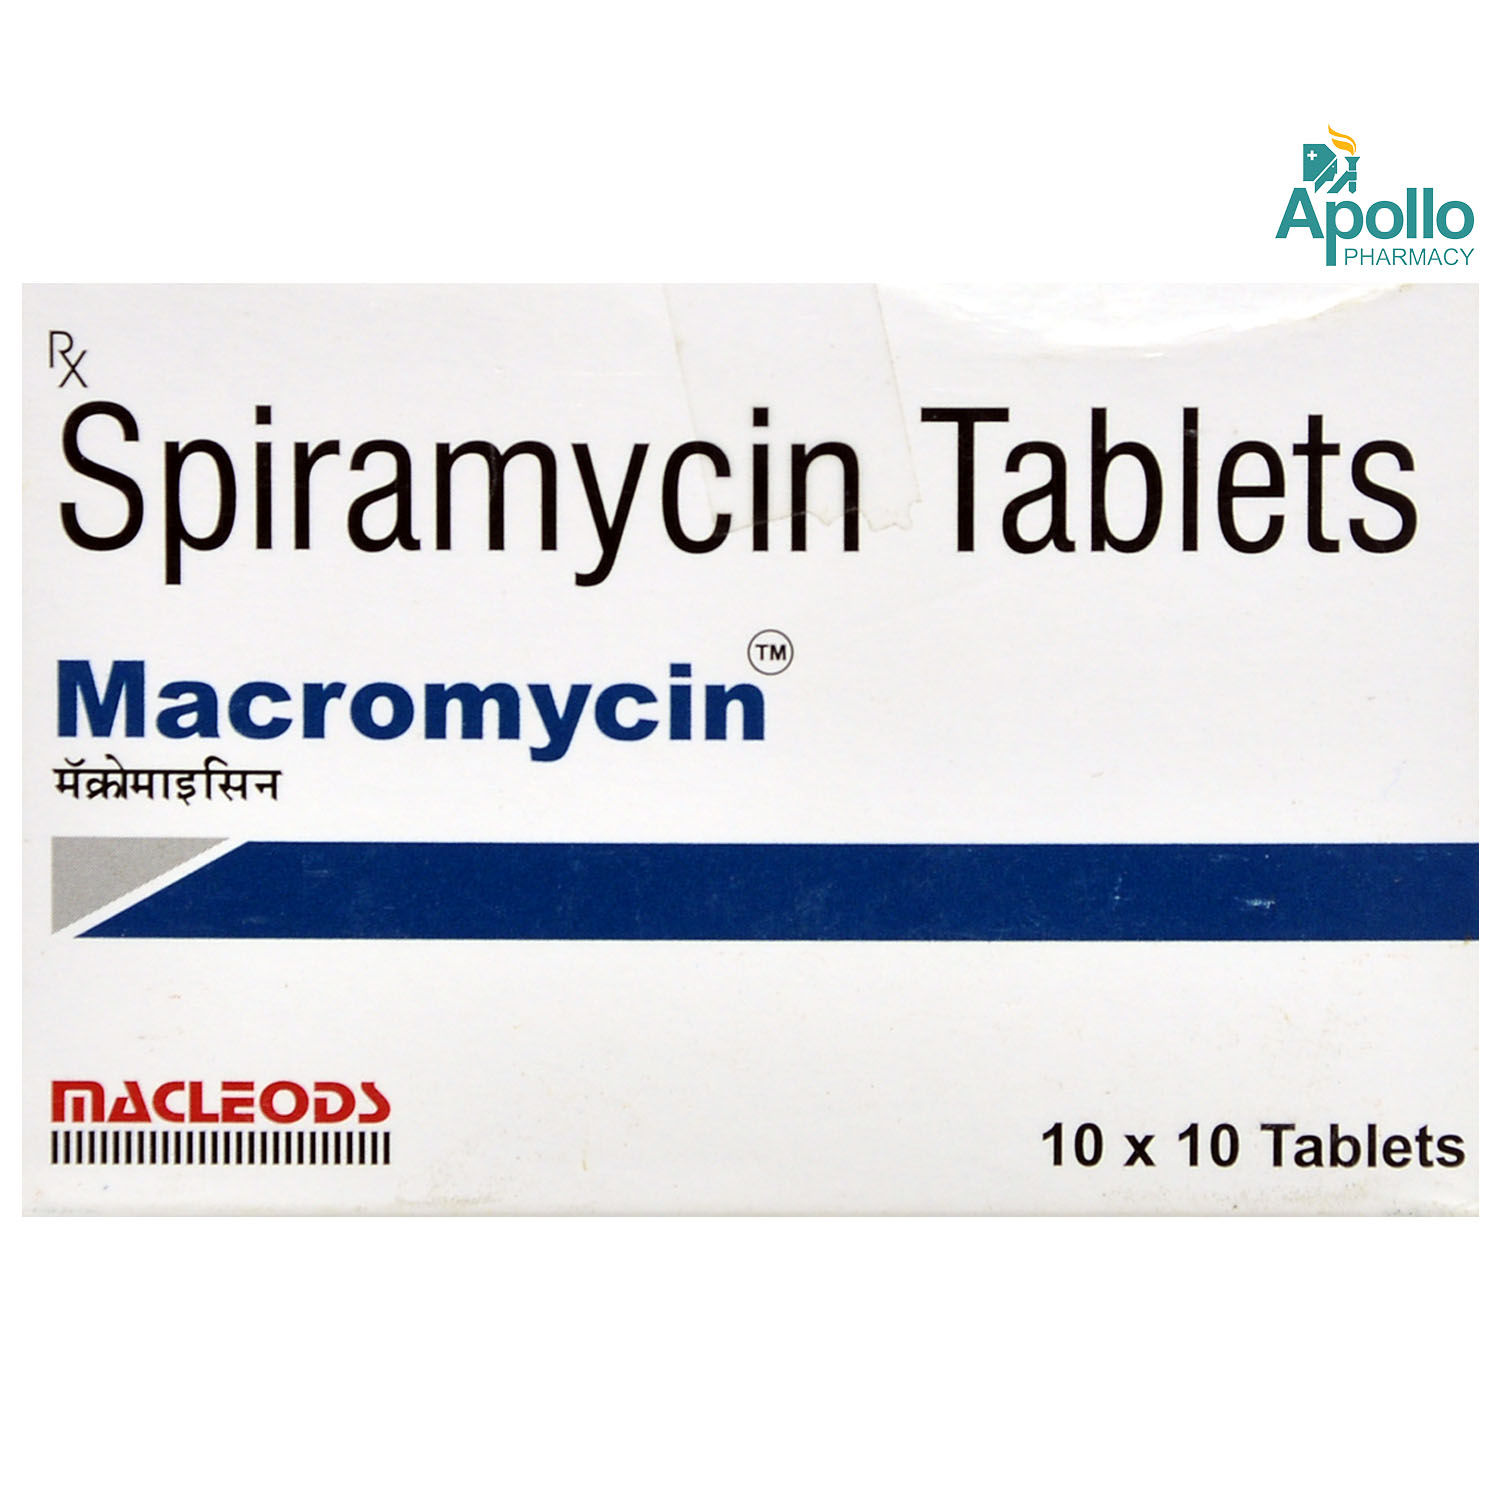 Macromycin Tablet Price Uses Side Effects Composition Apollo Pharmacy